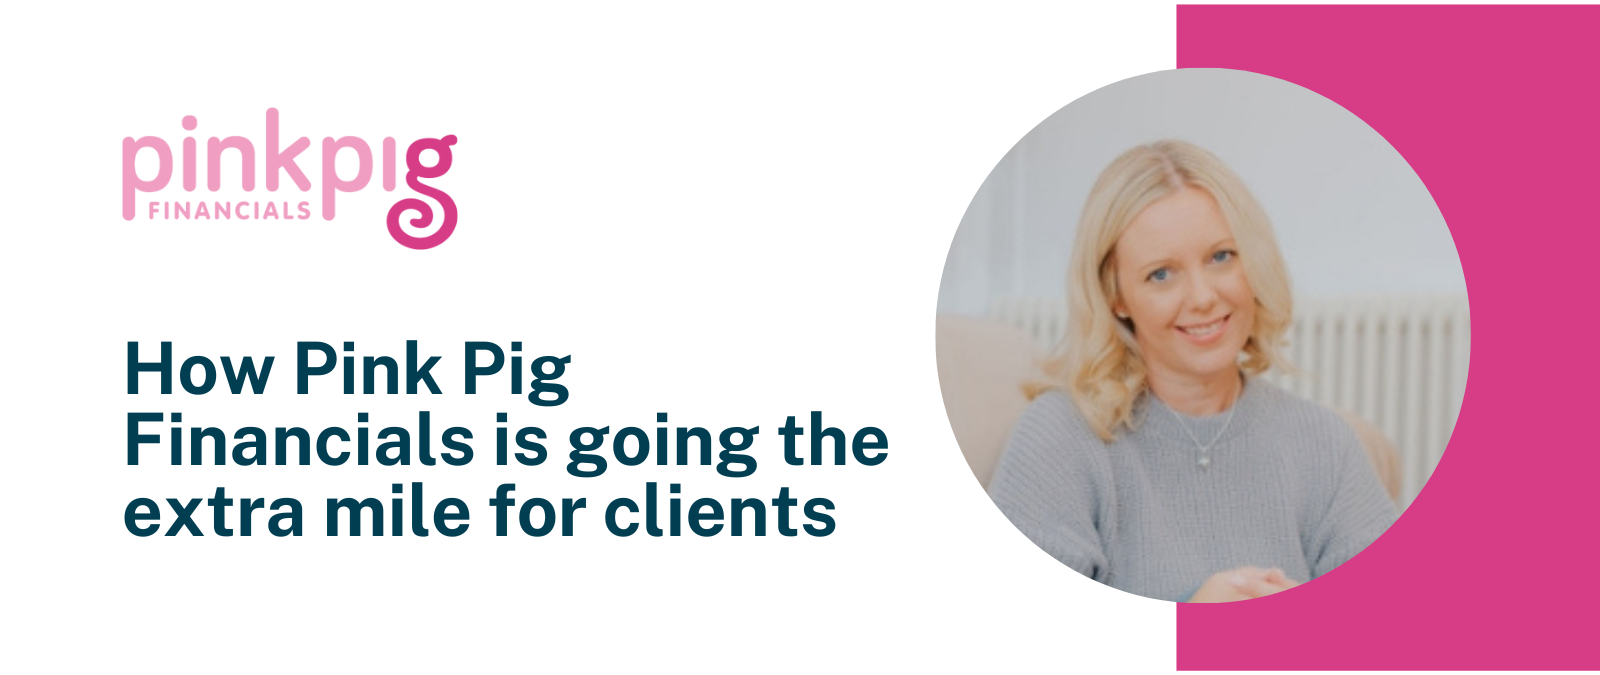 How Pink Pig Financials is going the extra mile for clients